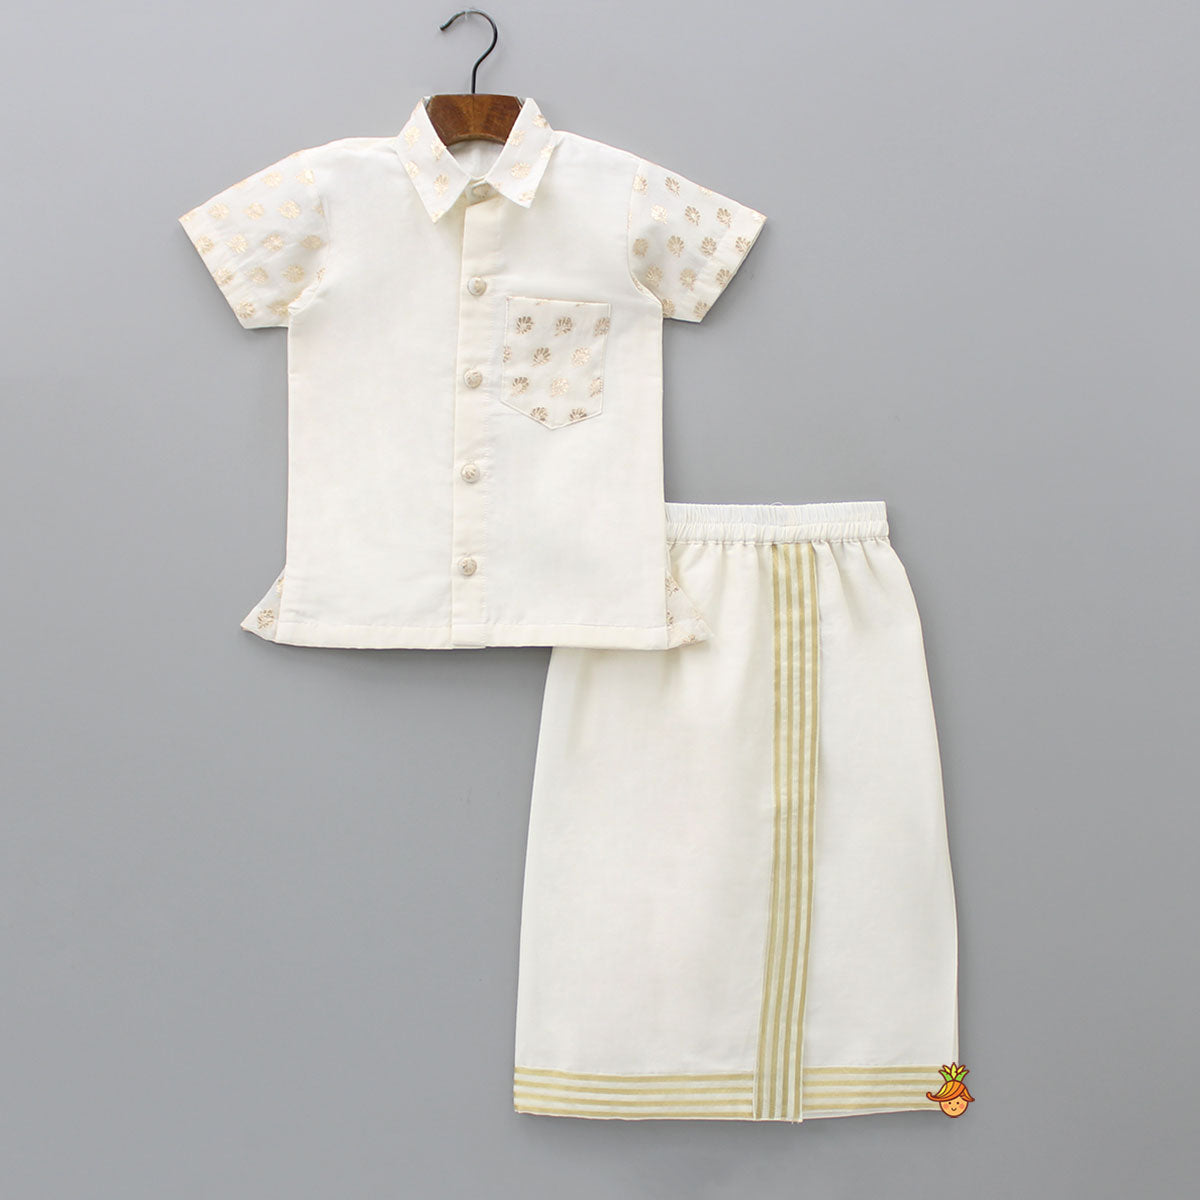 Exquisite Off White Shirt And Stitched Lungi With Shawl